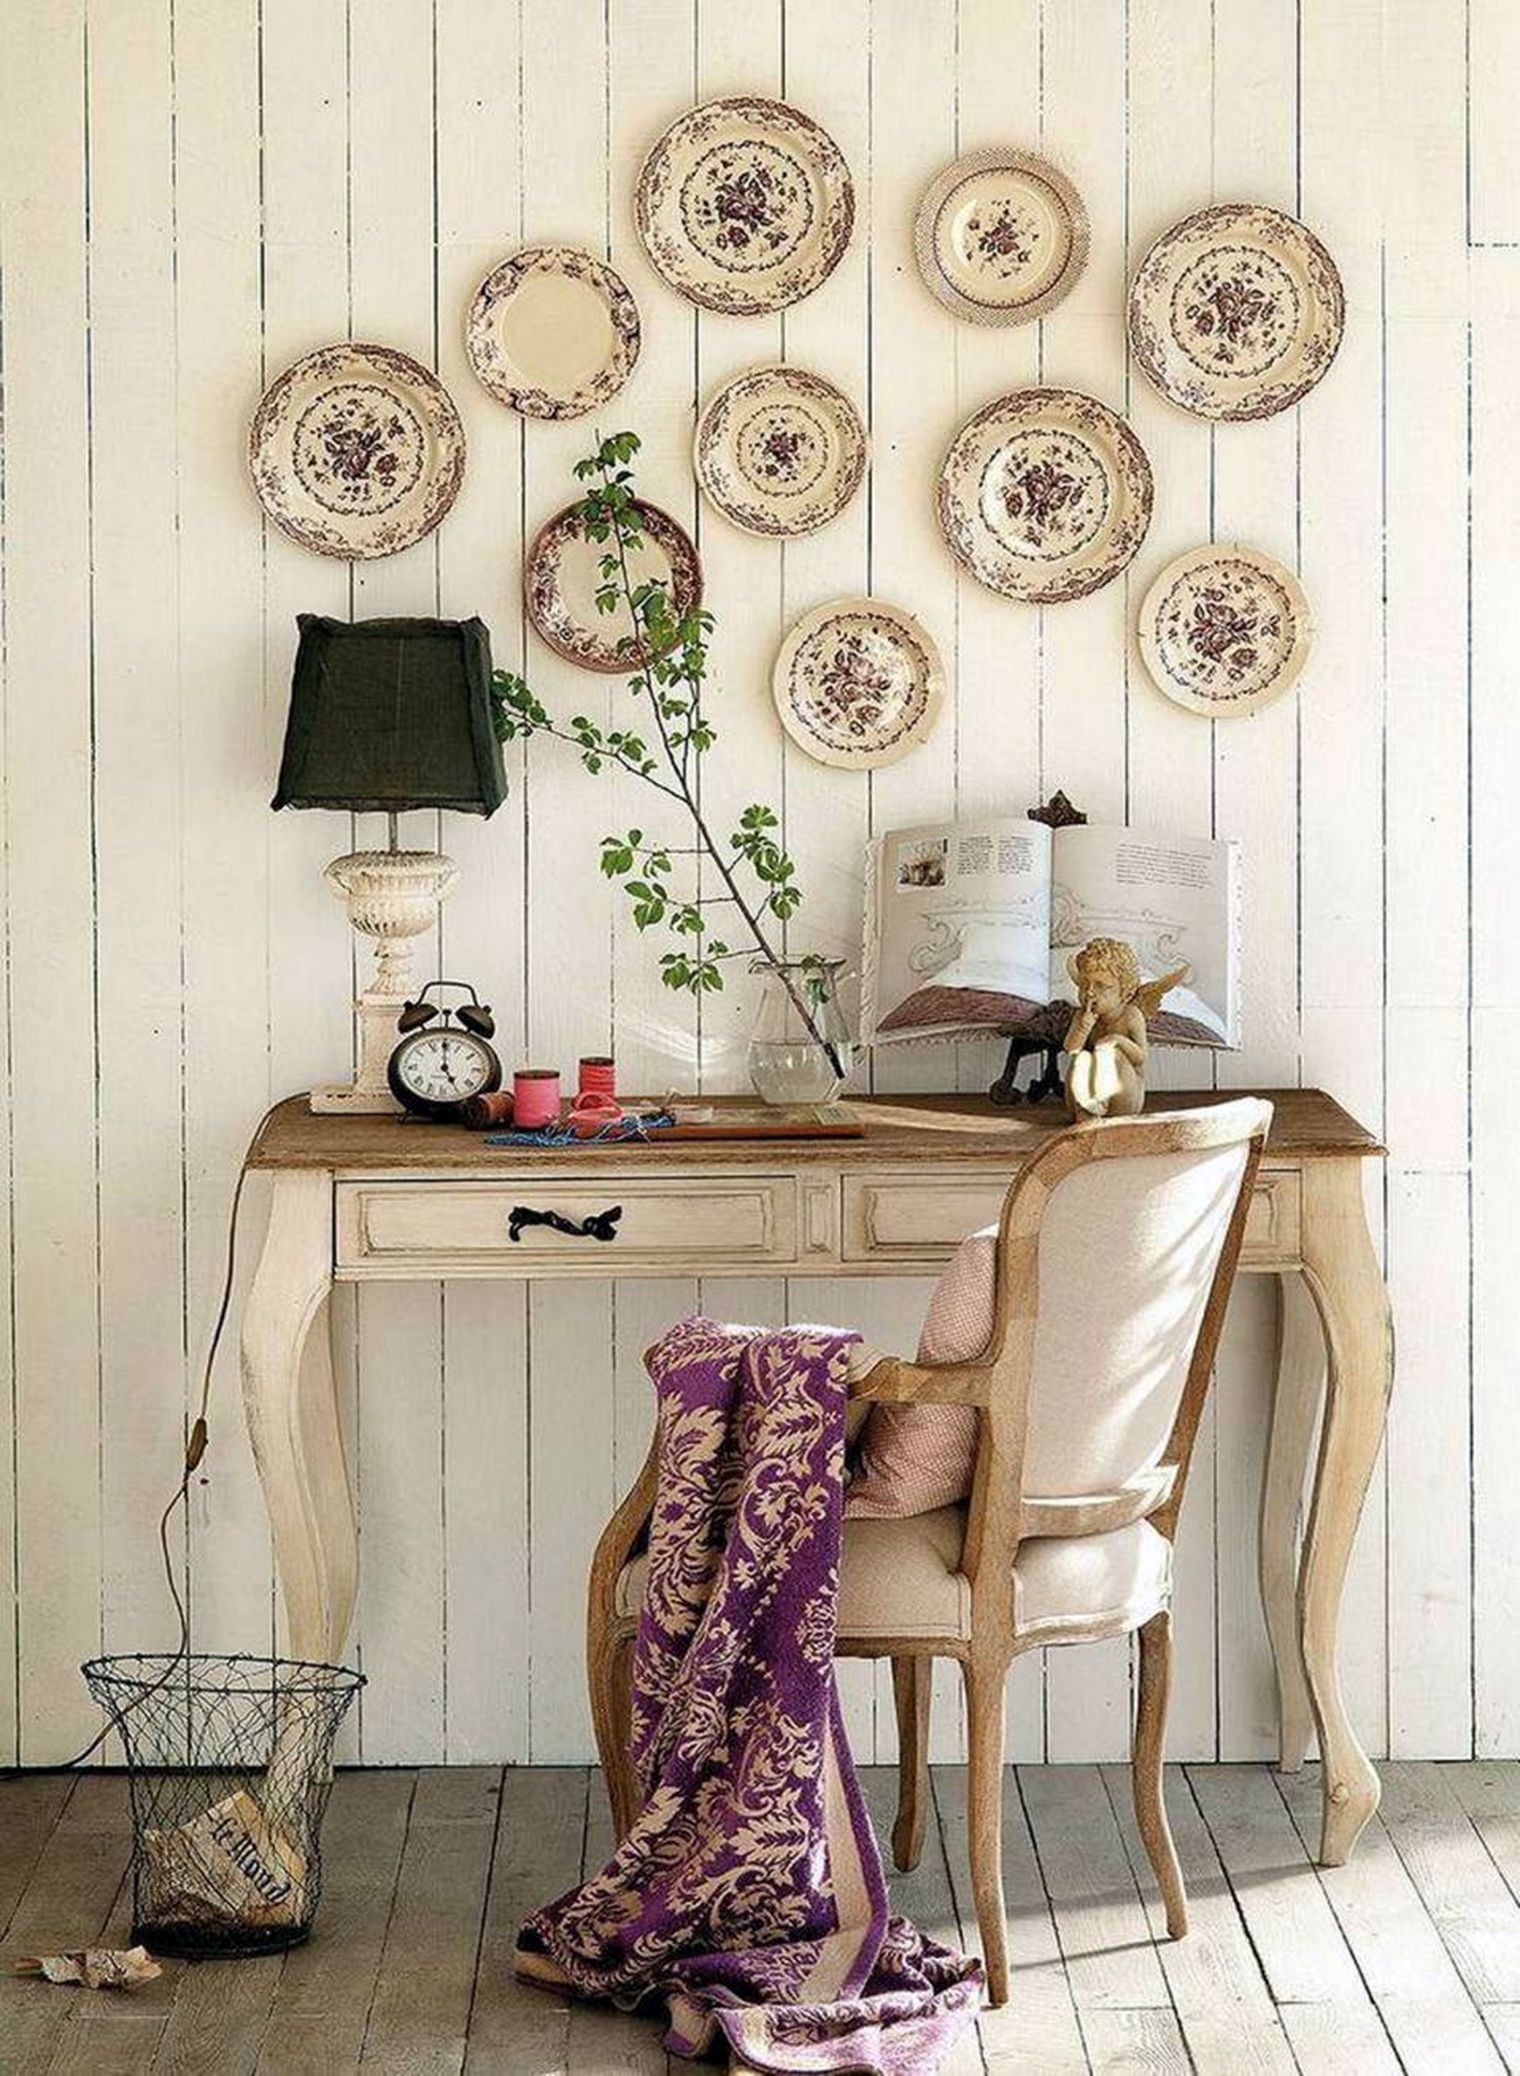 Antique Plates For DIY Wall Decorations From Diyfunworld